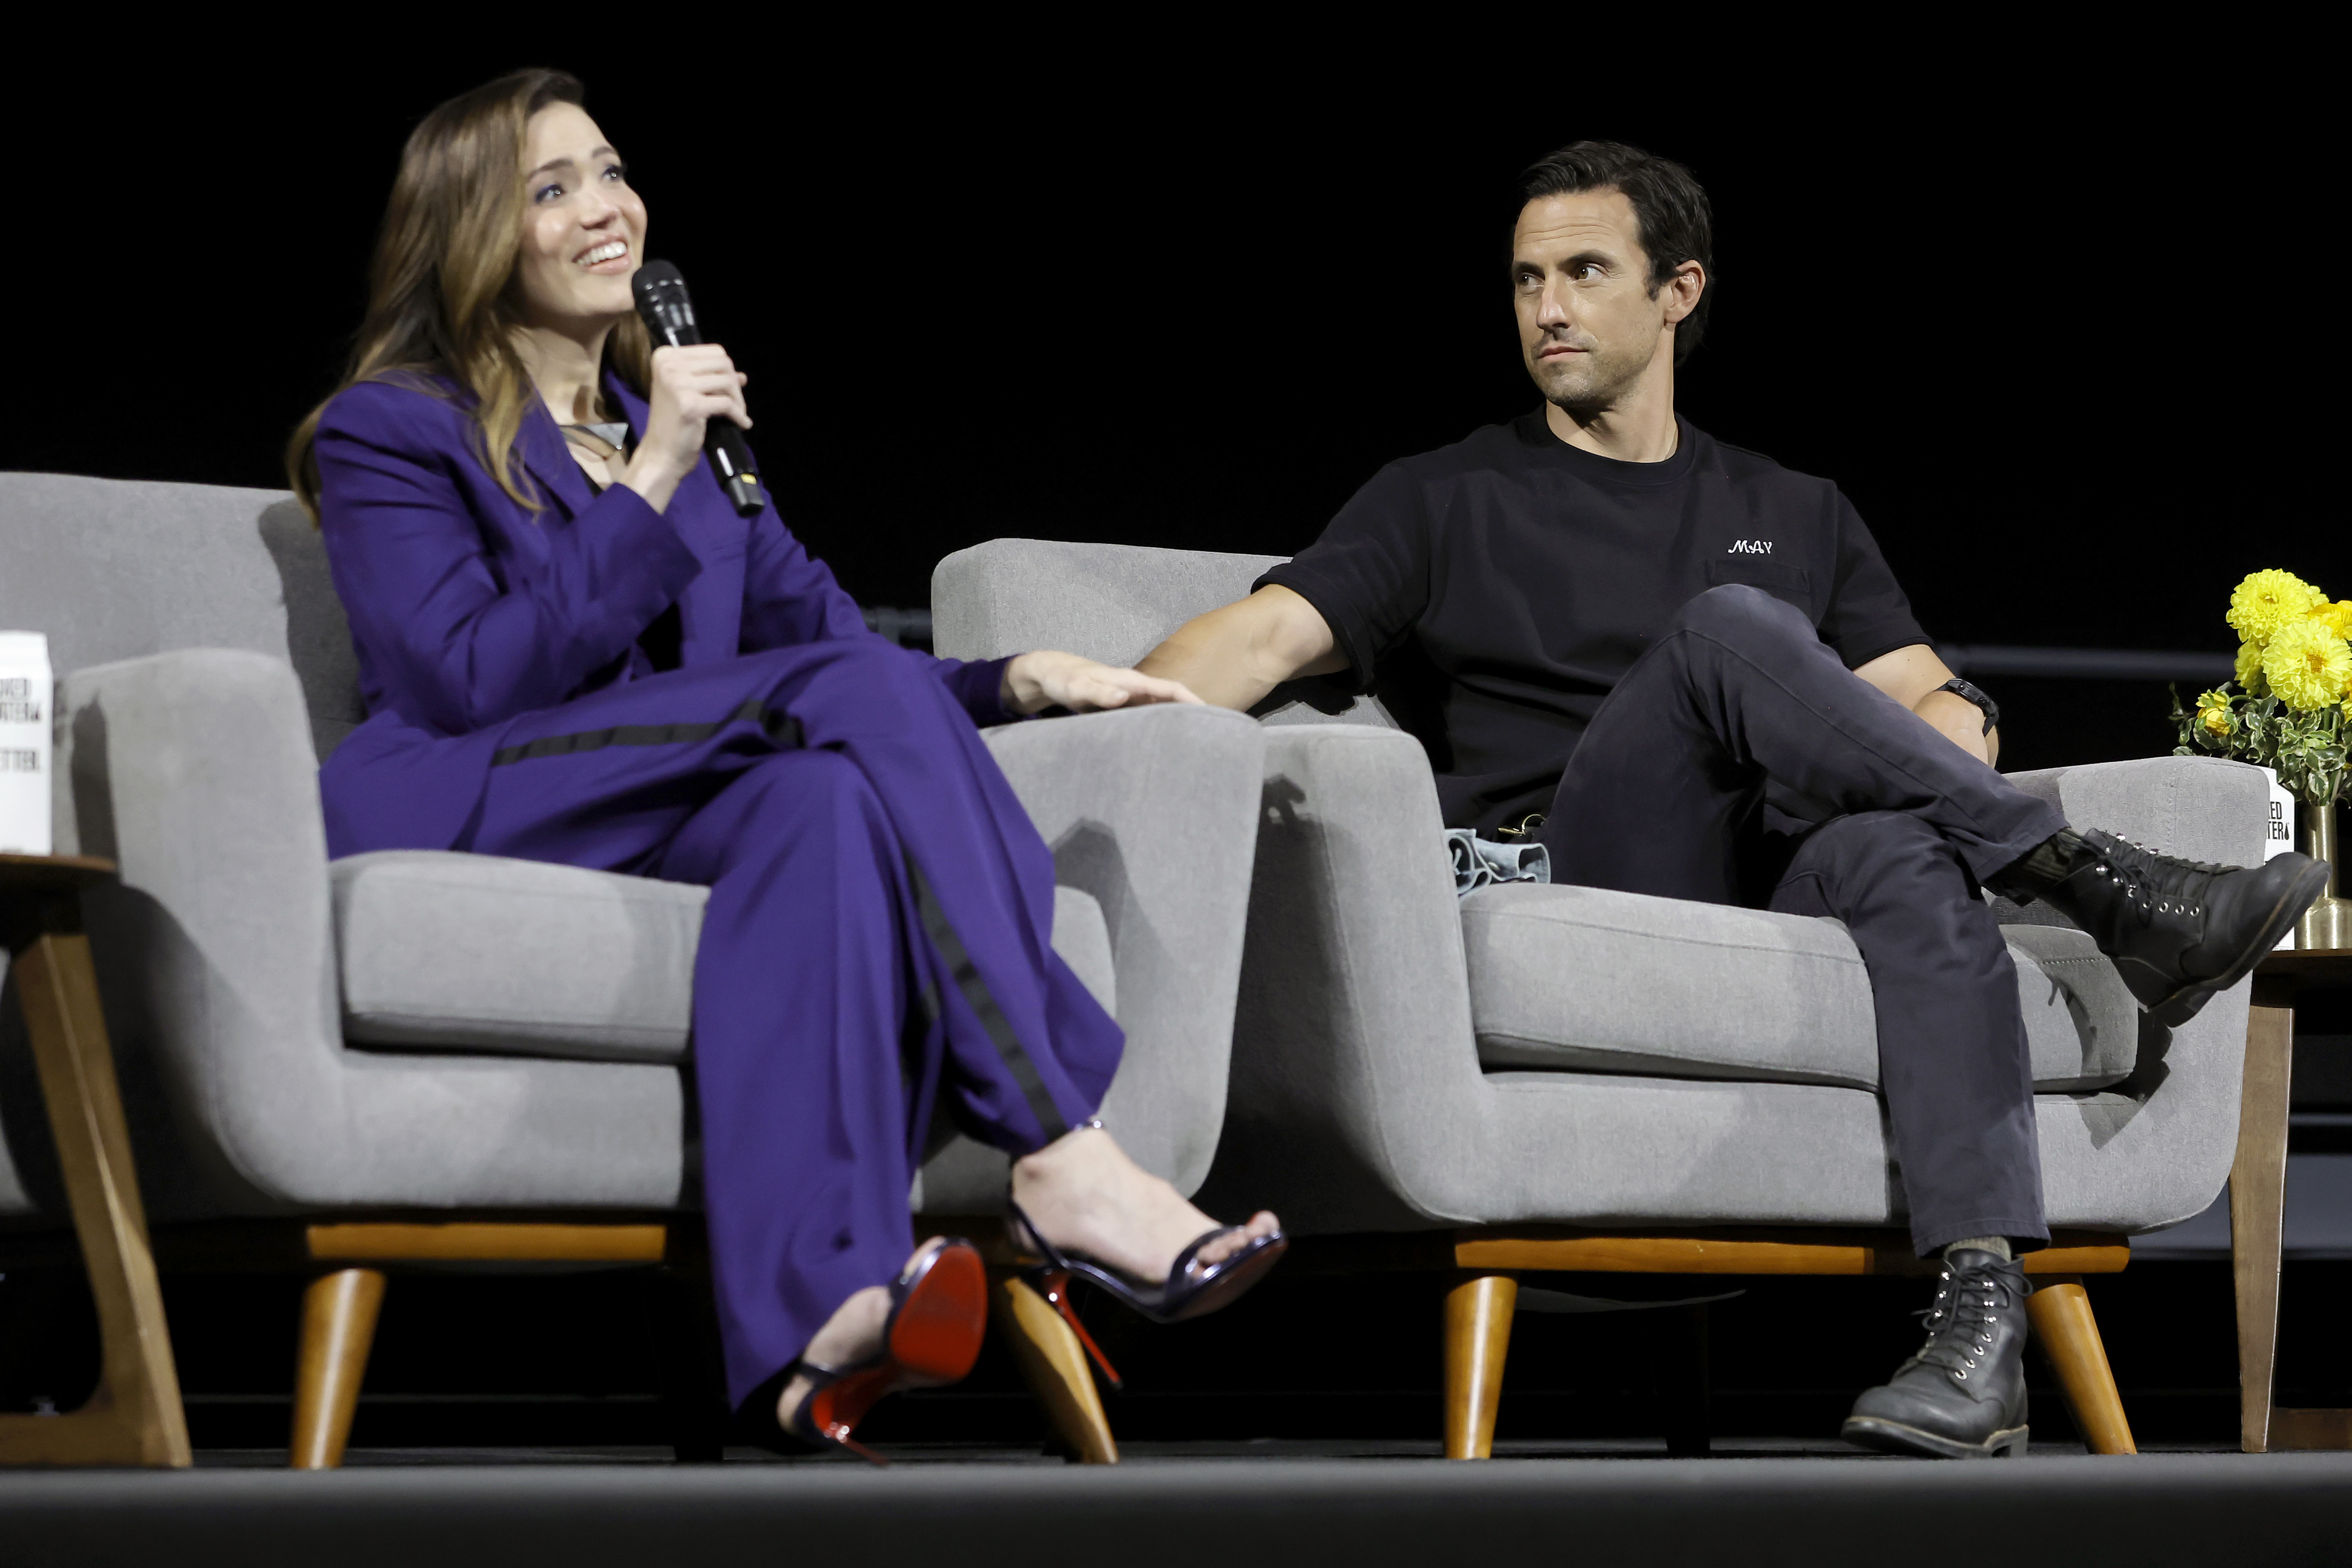 Mandy Moore and Milo Ventimiglia, who played Rebecca and Jack in 'This Is Us' Season 6, sit next to each other onstage. Moore wears a dark blue suit. Ventimiglia wears a black shirt and gray pants.